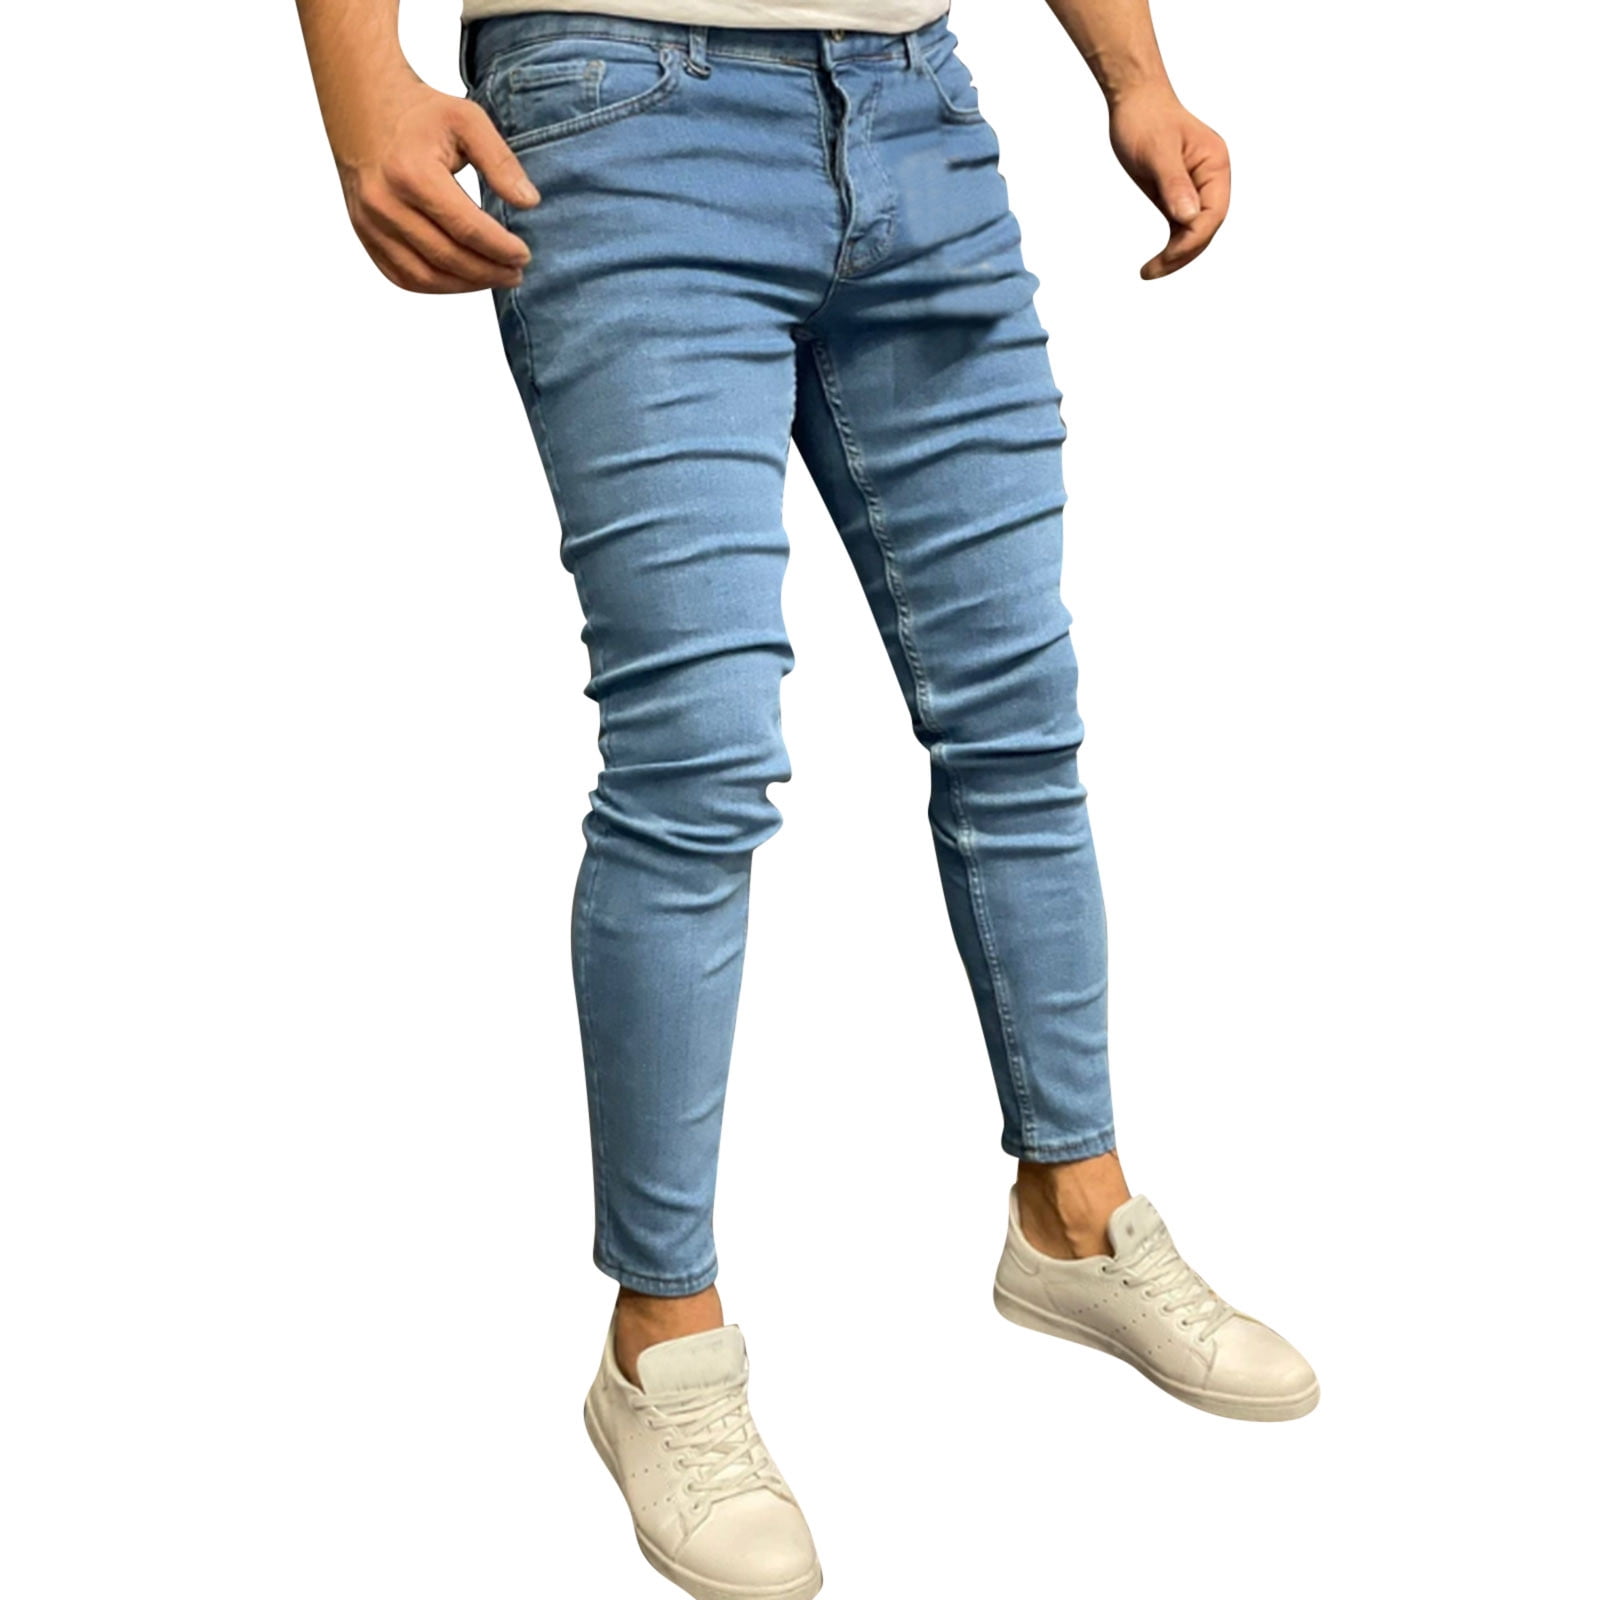 47+ Types of Jeans - Leg Length, Cut, and Style | TREASURIE